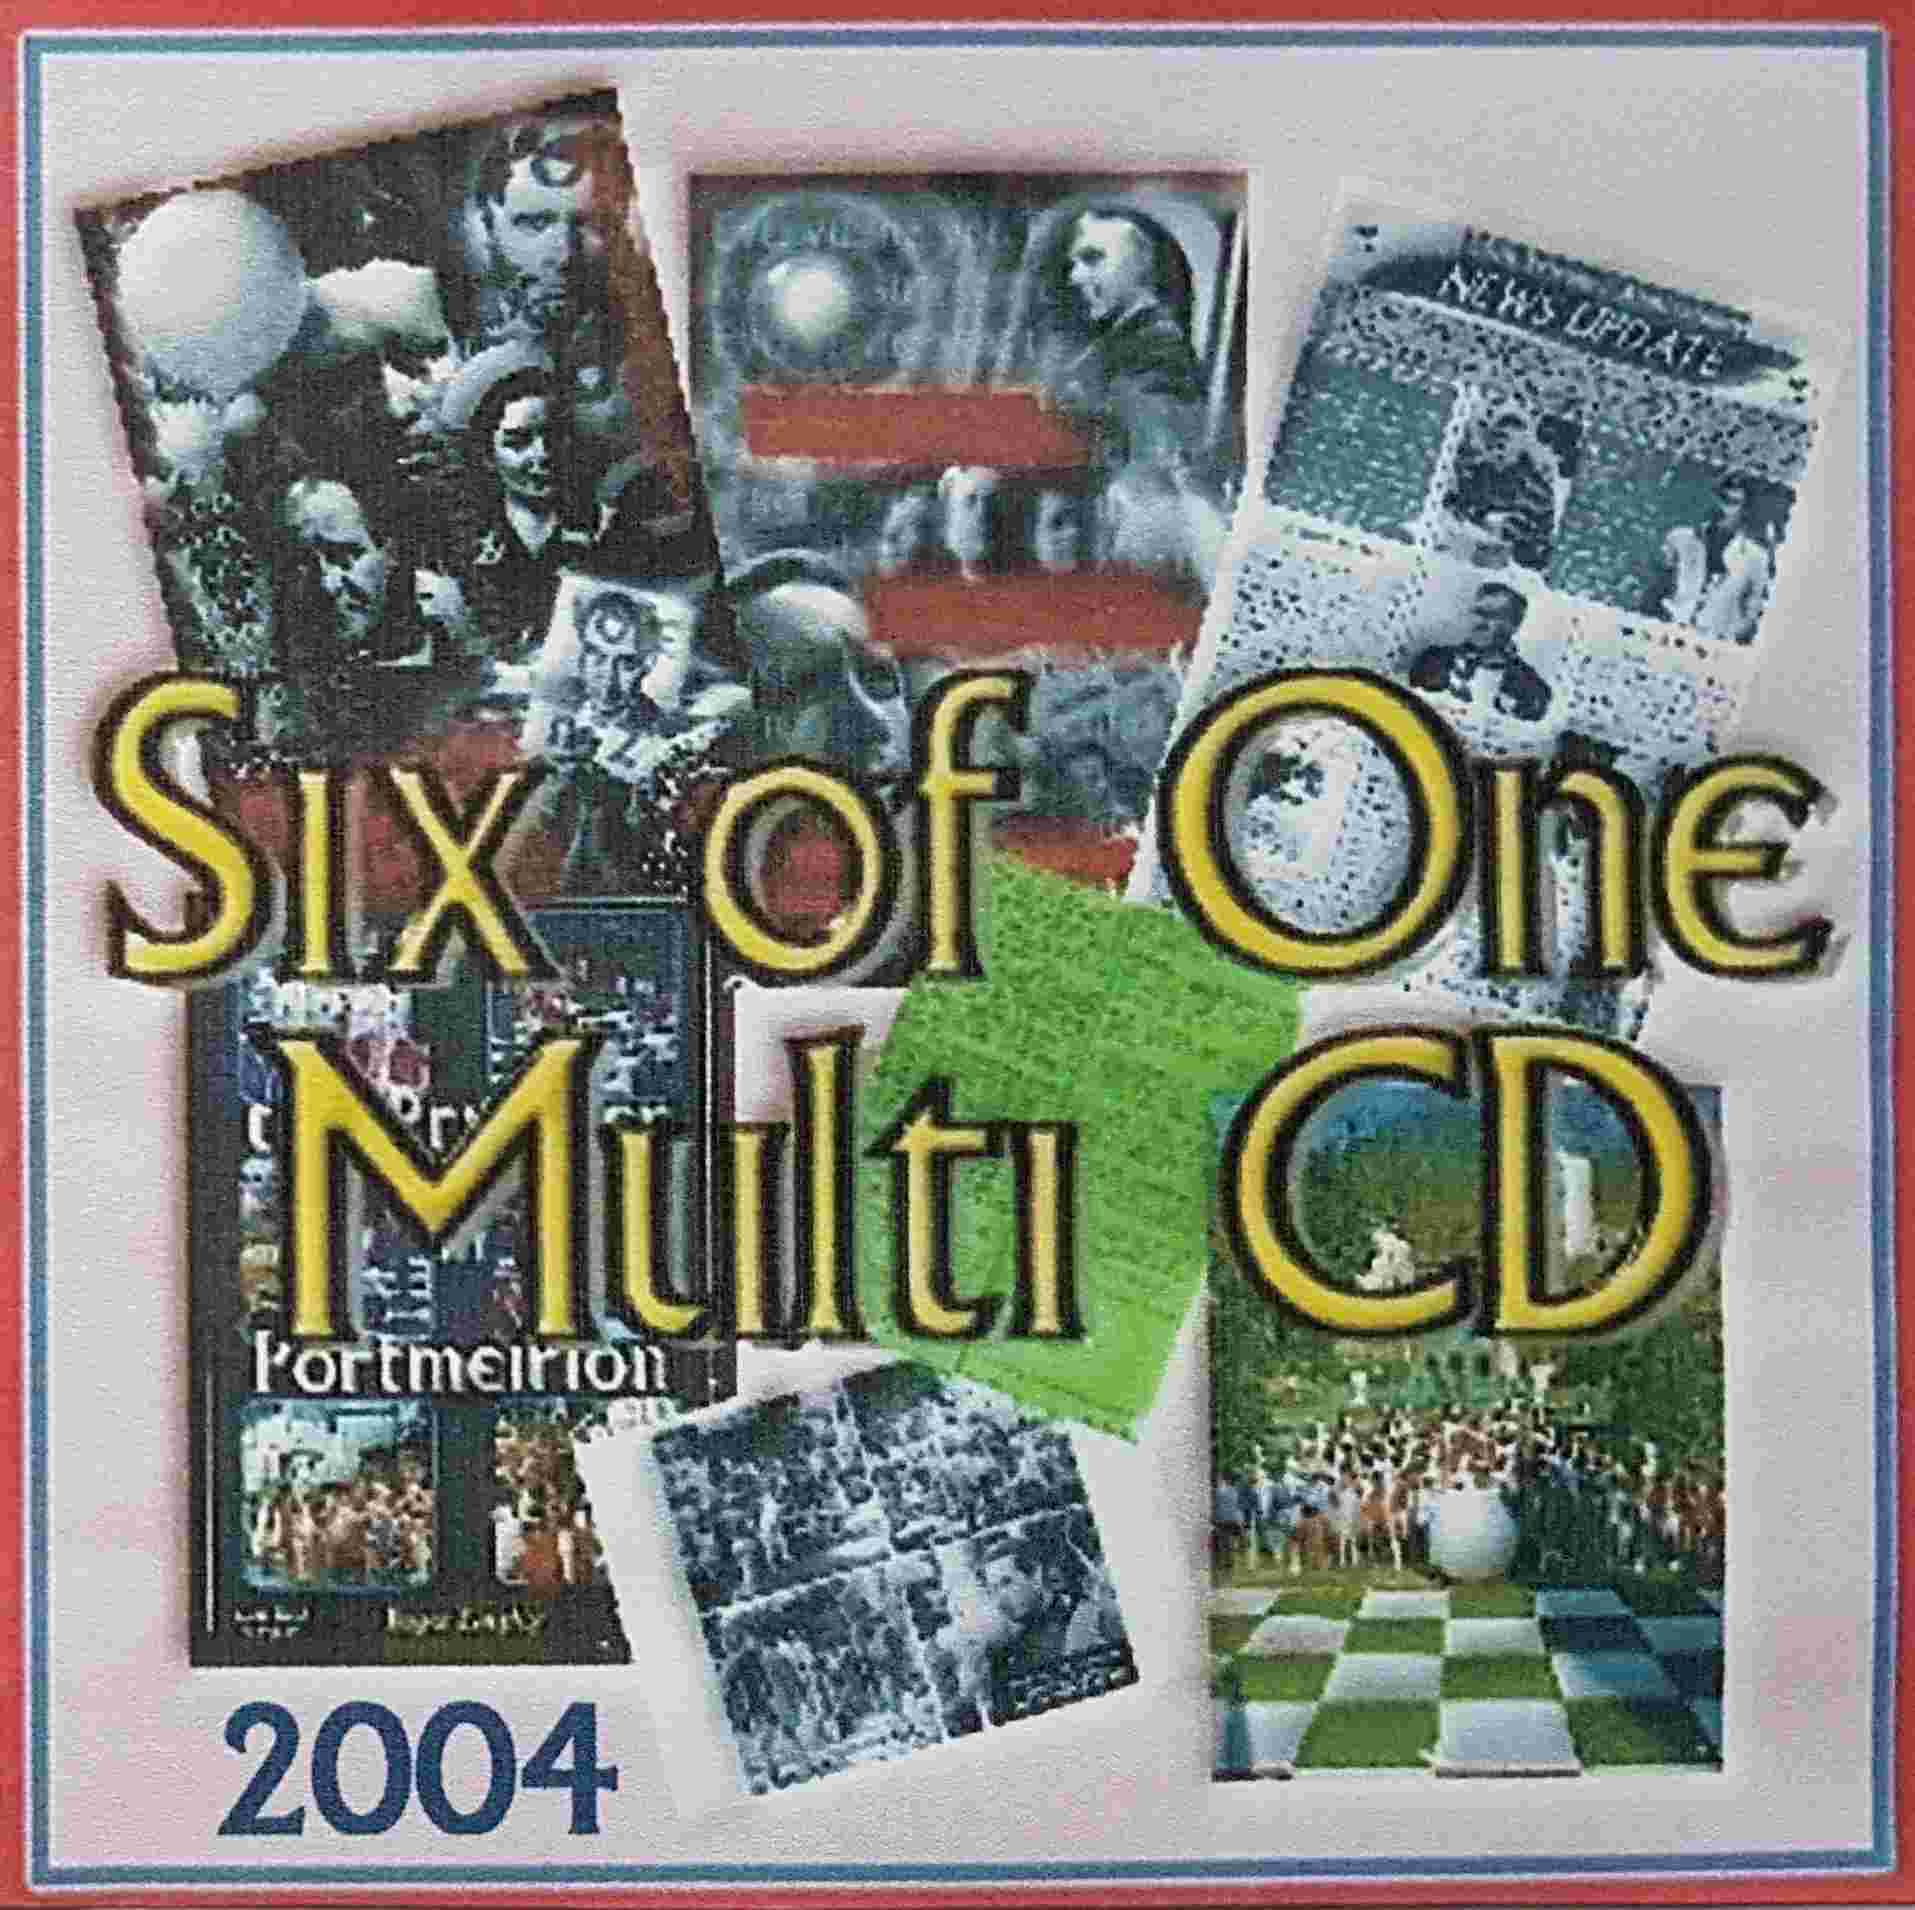 Picture of Six of one multi CD by artist Unknown from ITV, Channel 4 and Channel 5 dvds library